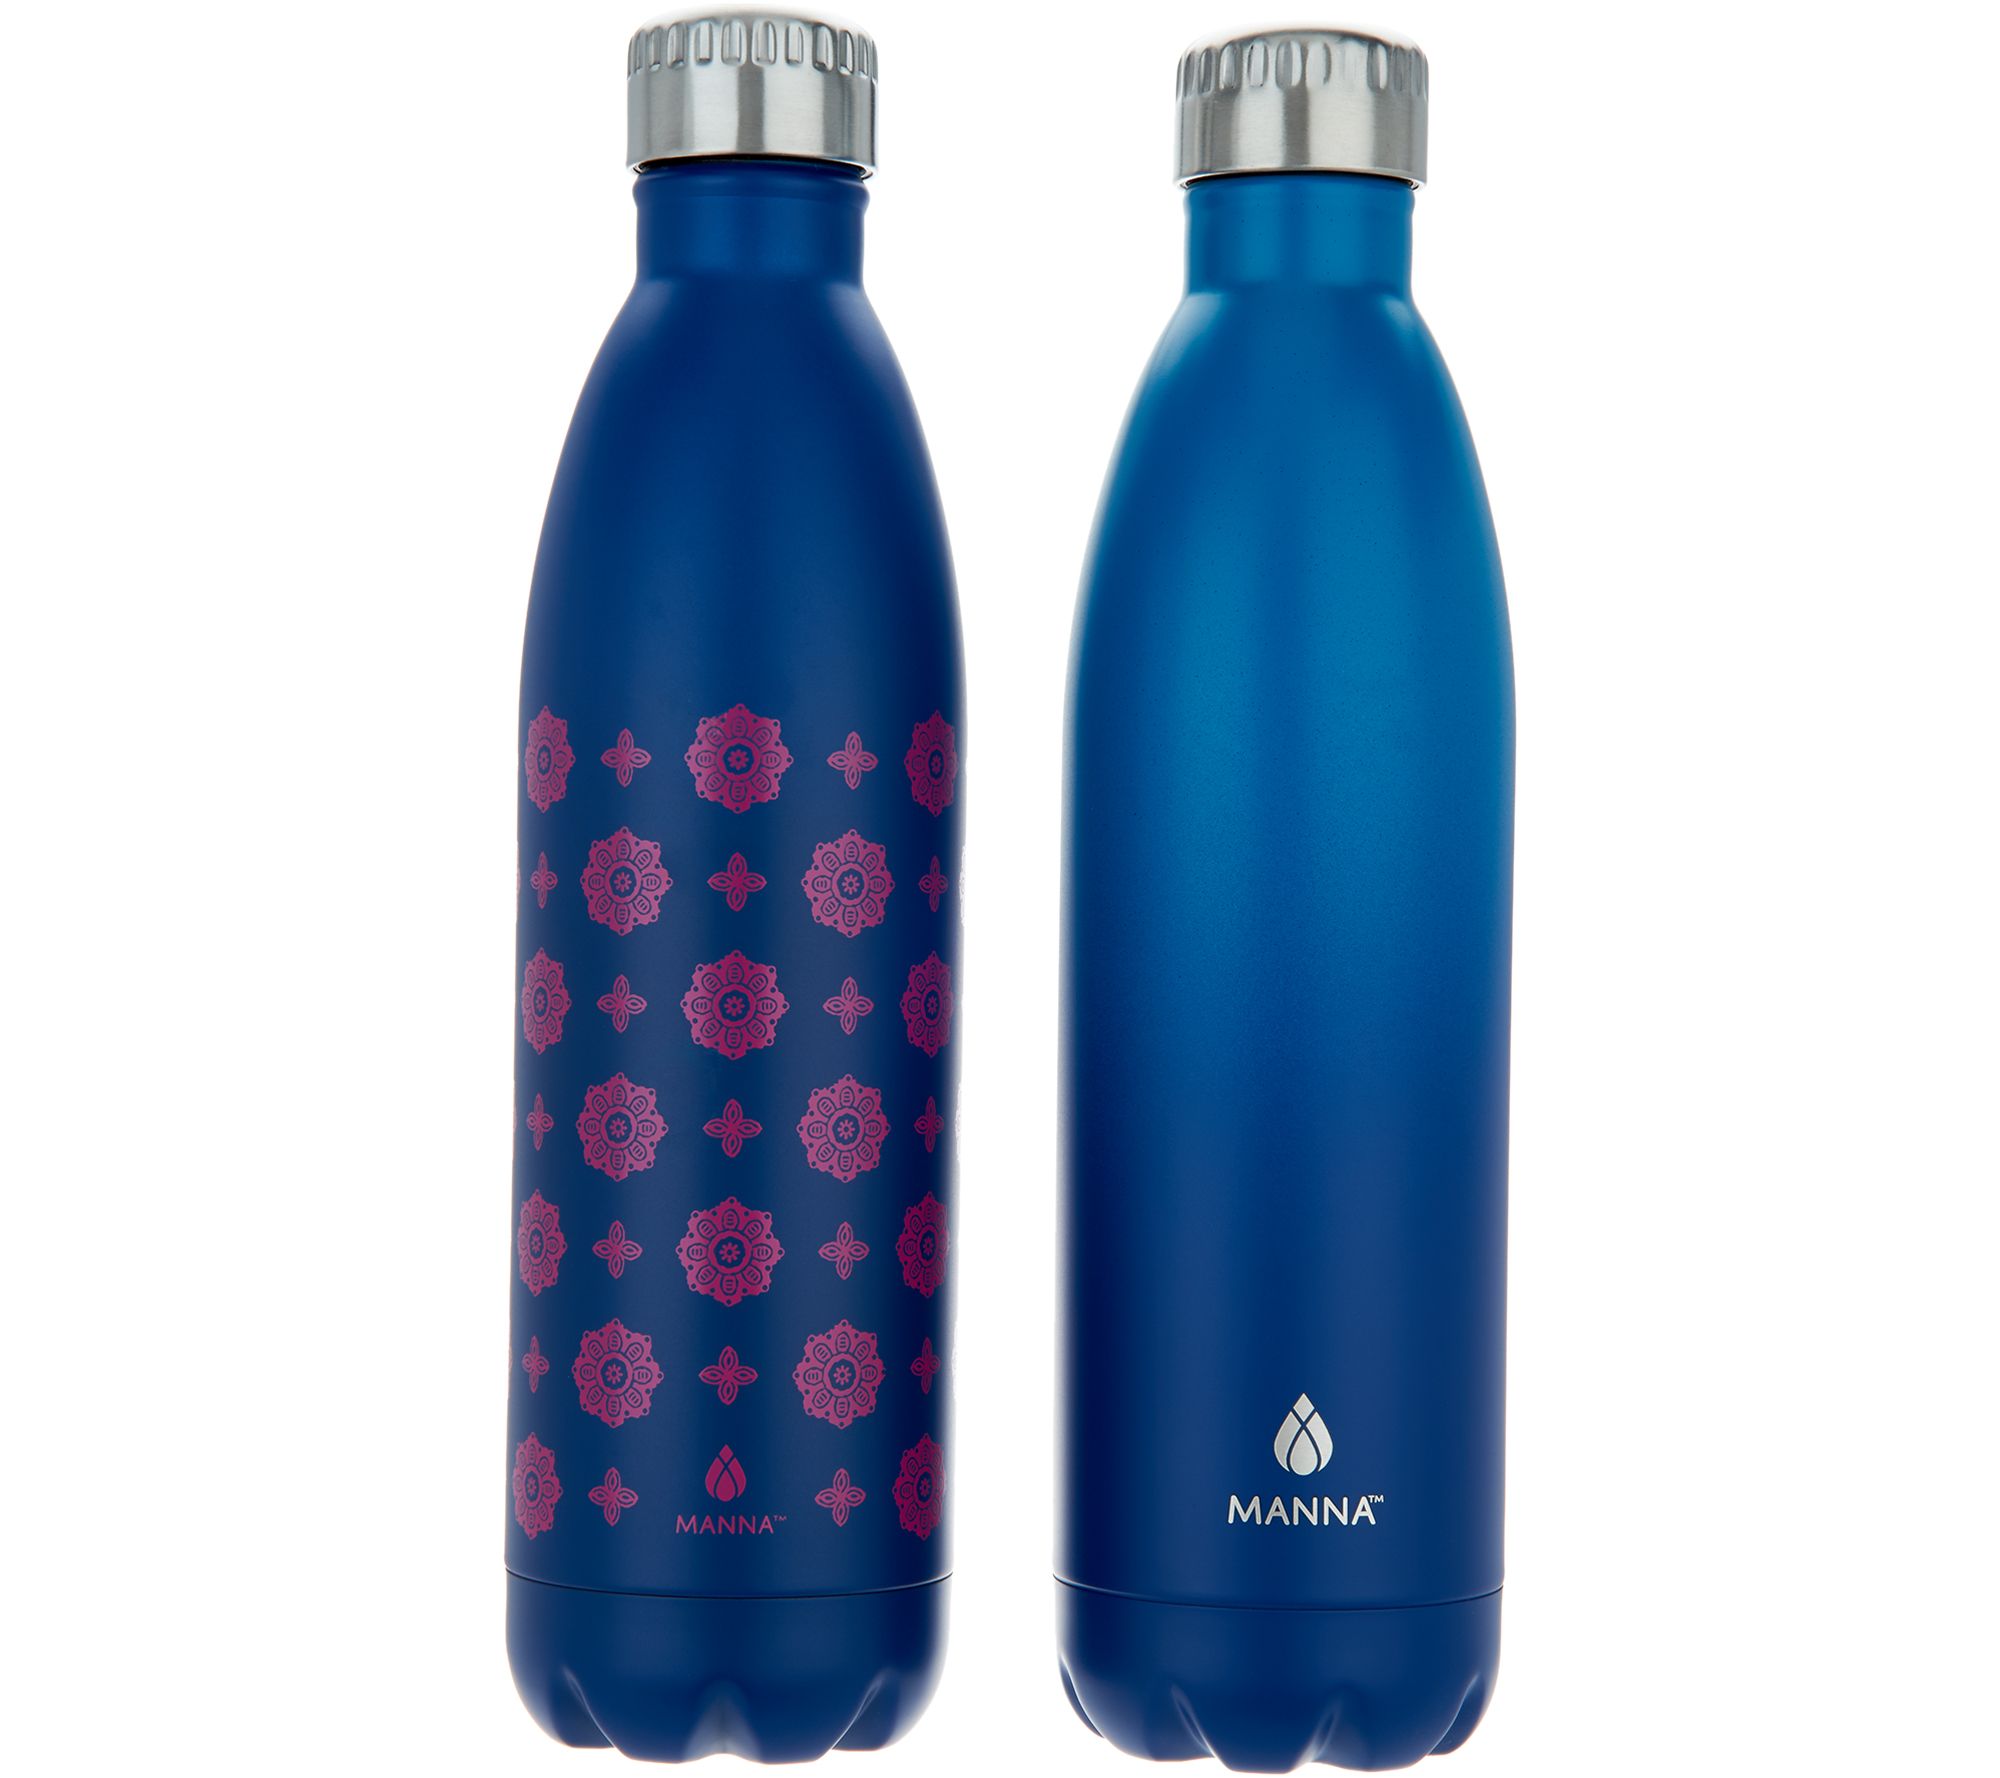 S'well Triple-Walled Stainless Steel Water Bottle, White Gold Ombre